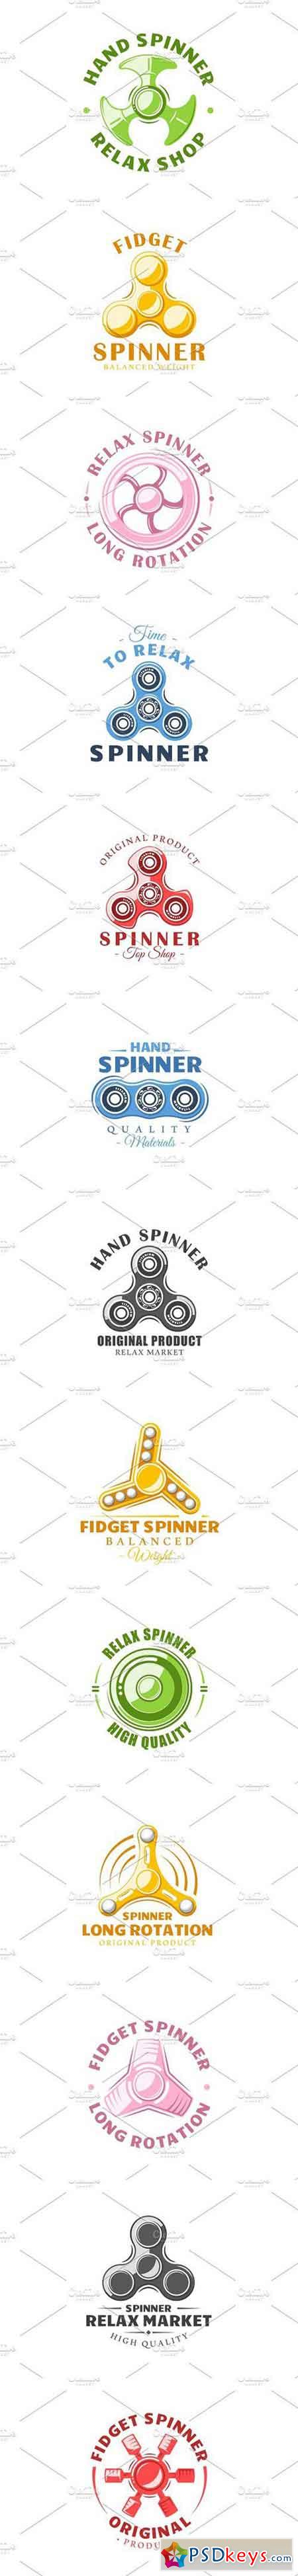 18 Colored Spinner Logos Templates 1663445